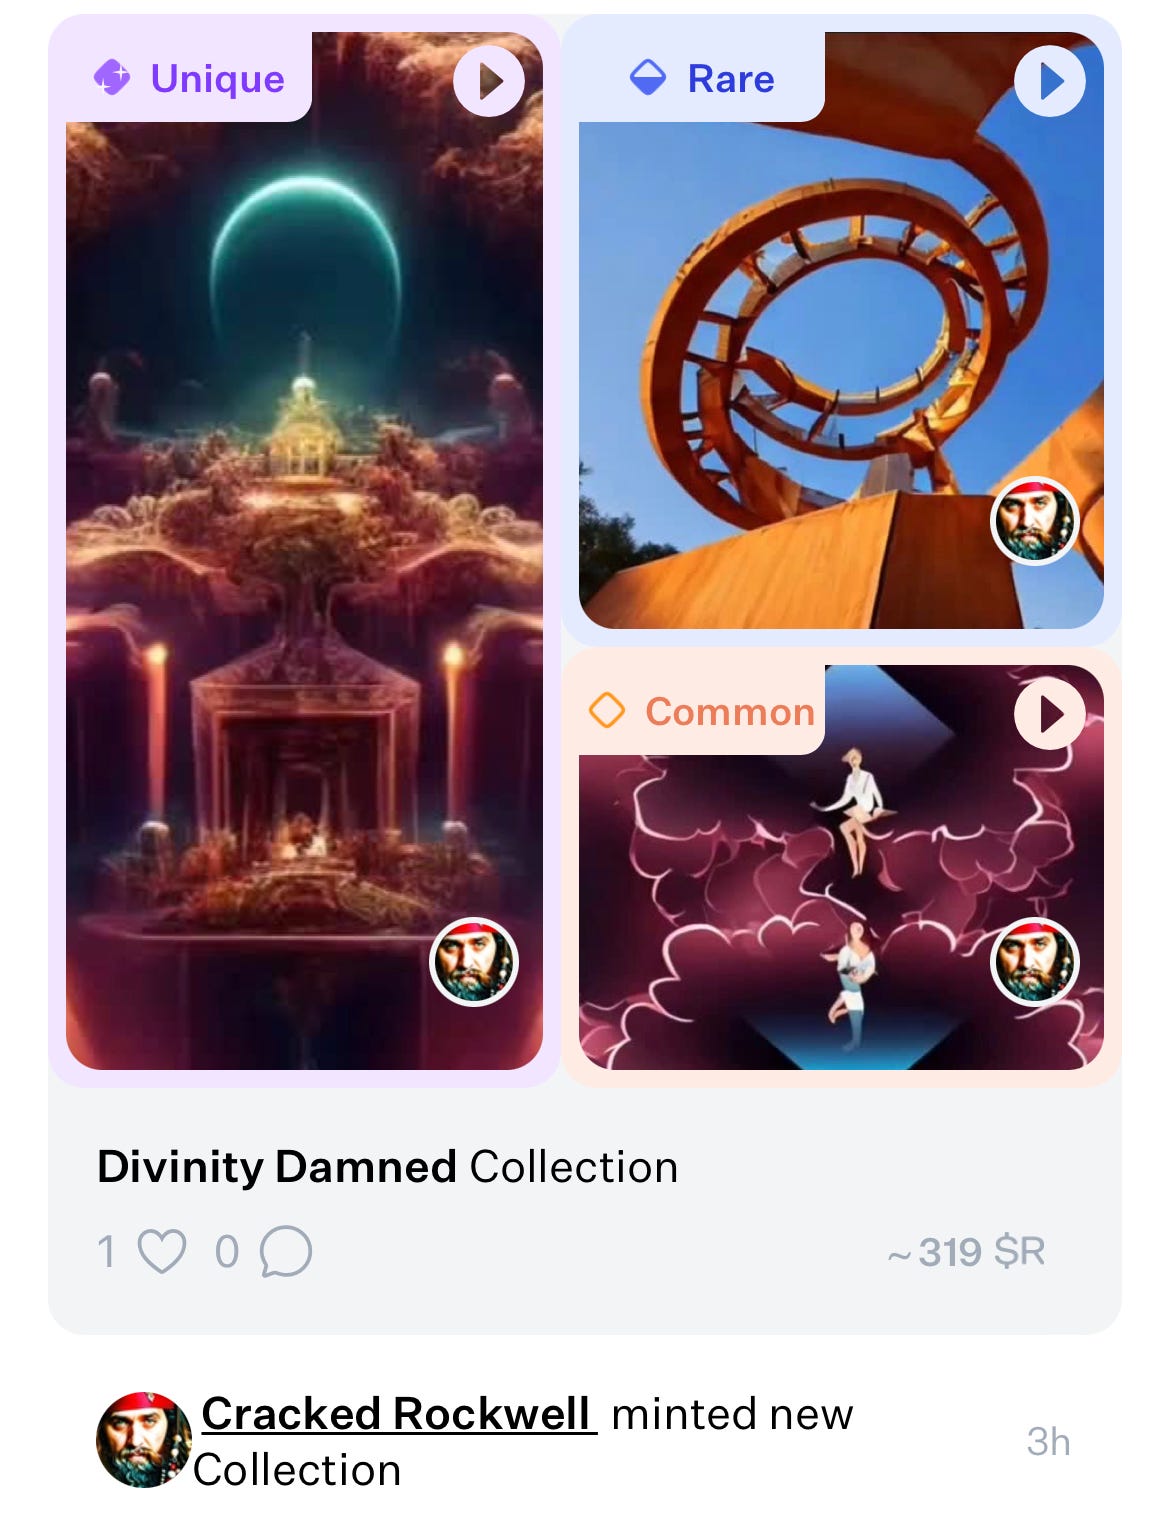 Revel - Collect, Trade, and Mint Digital Cards